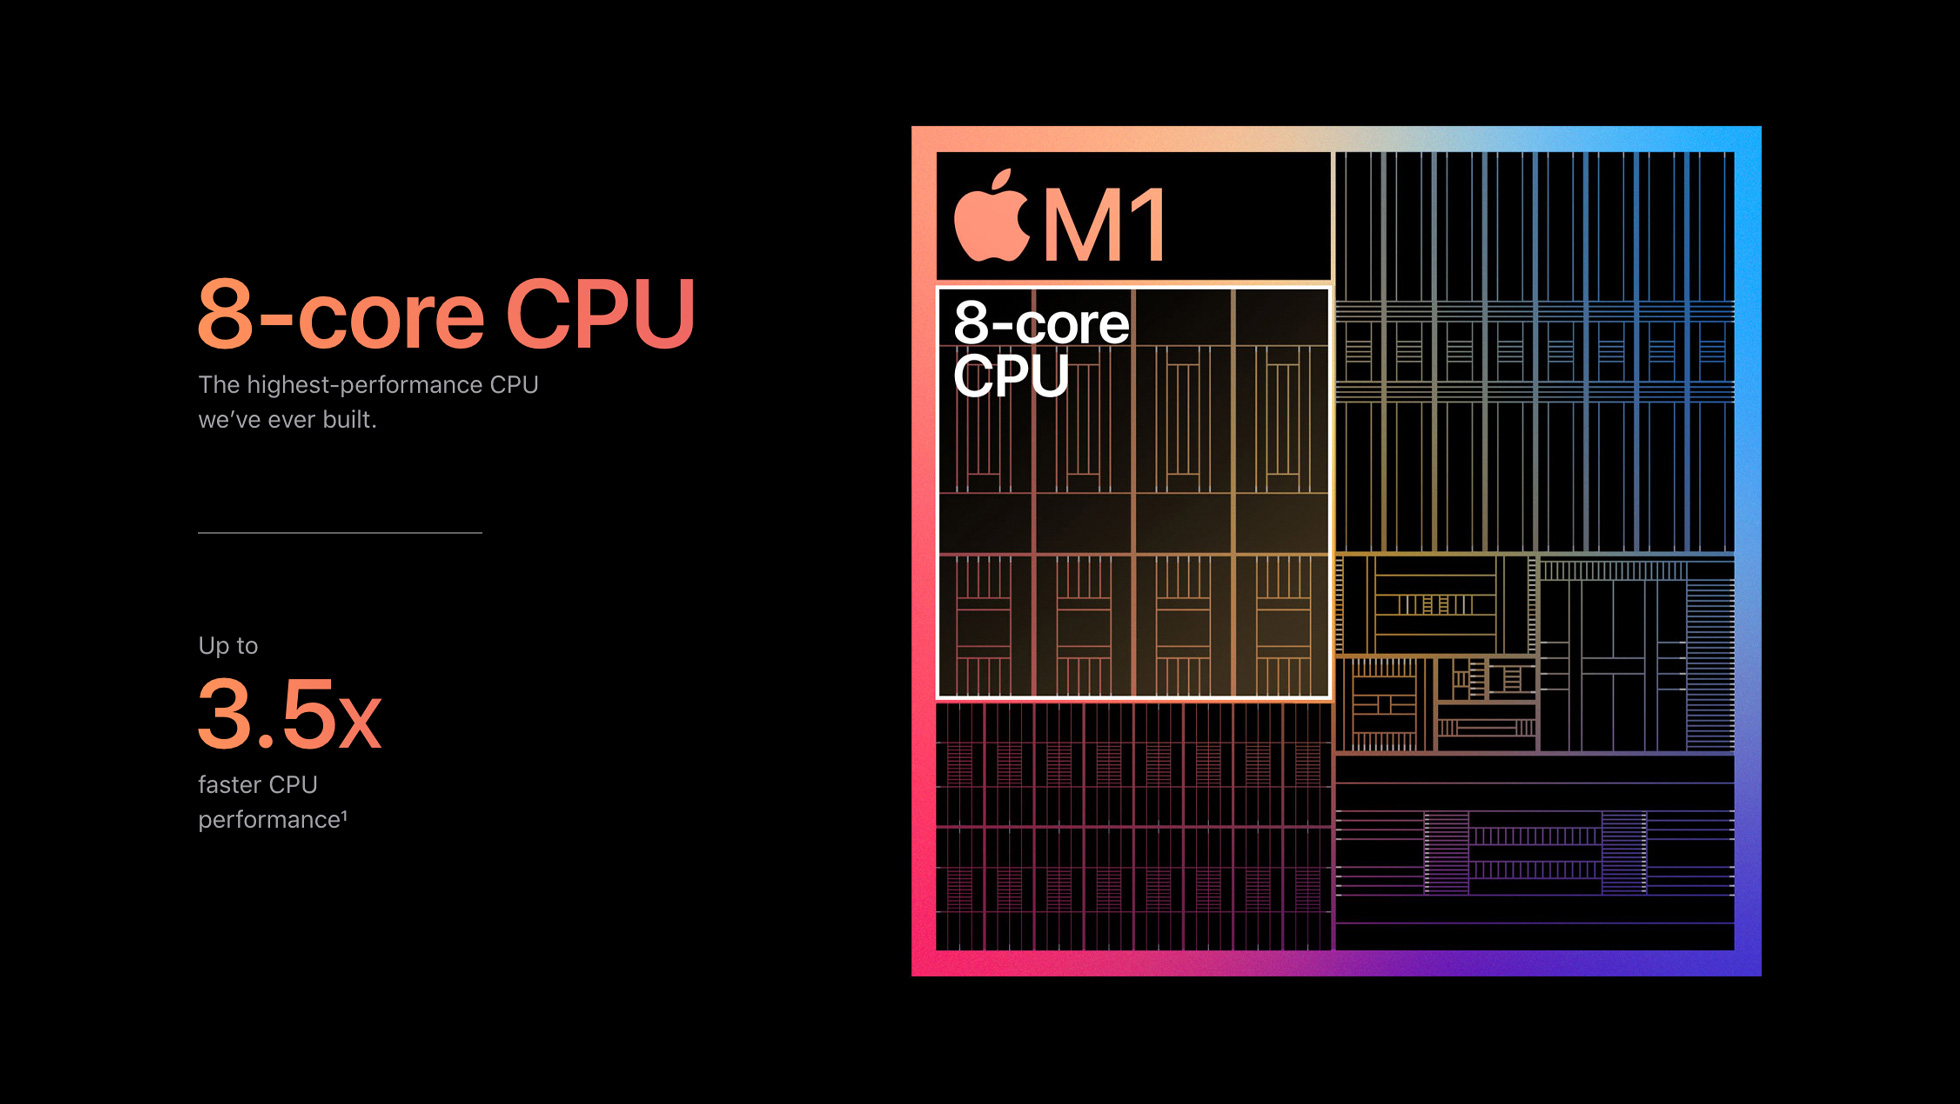 party cad for mac